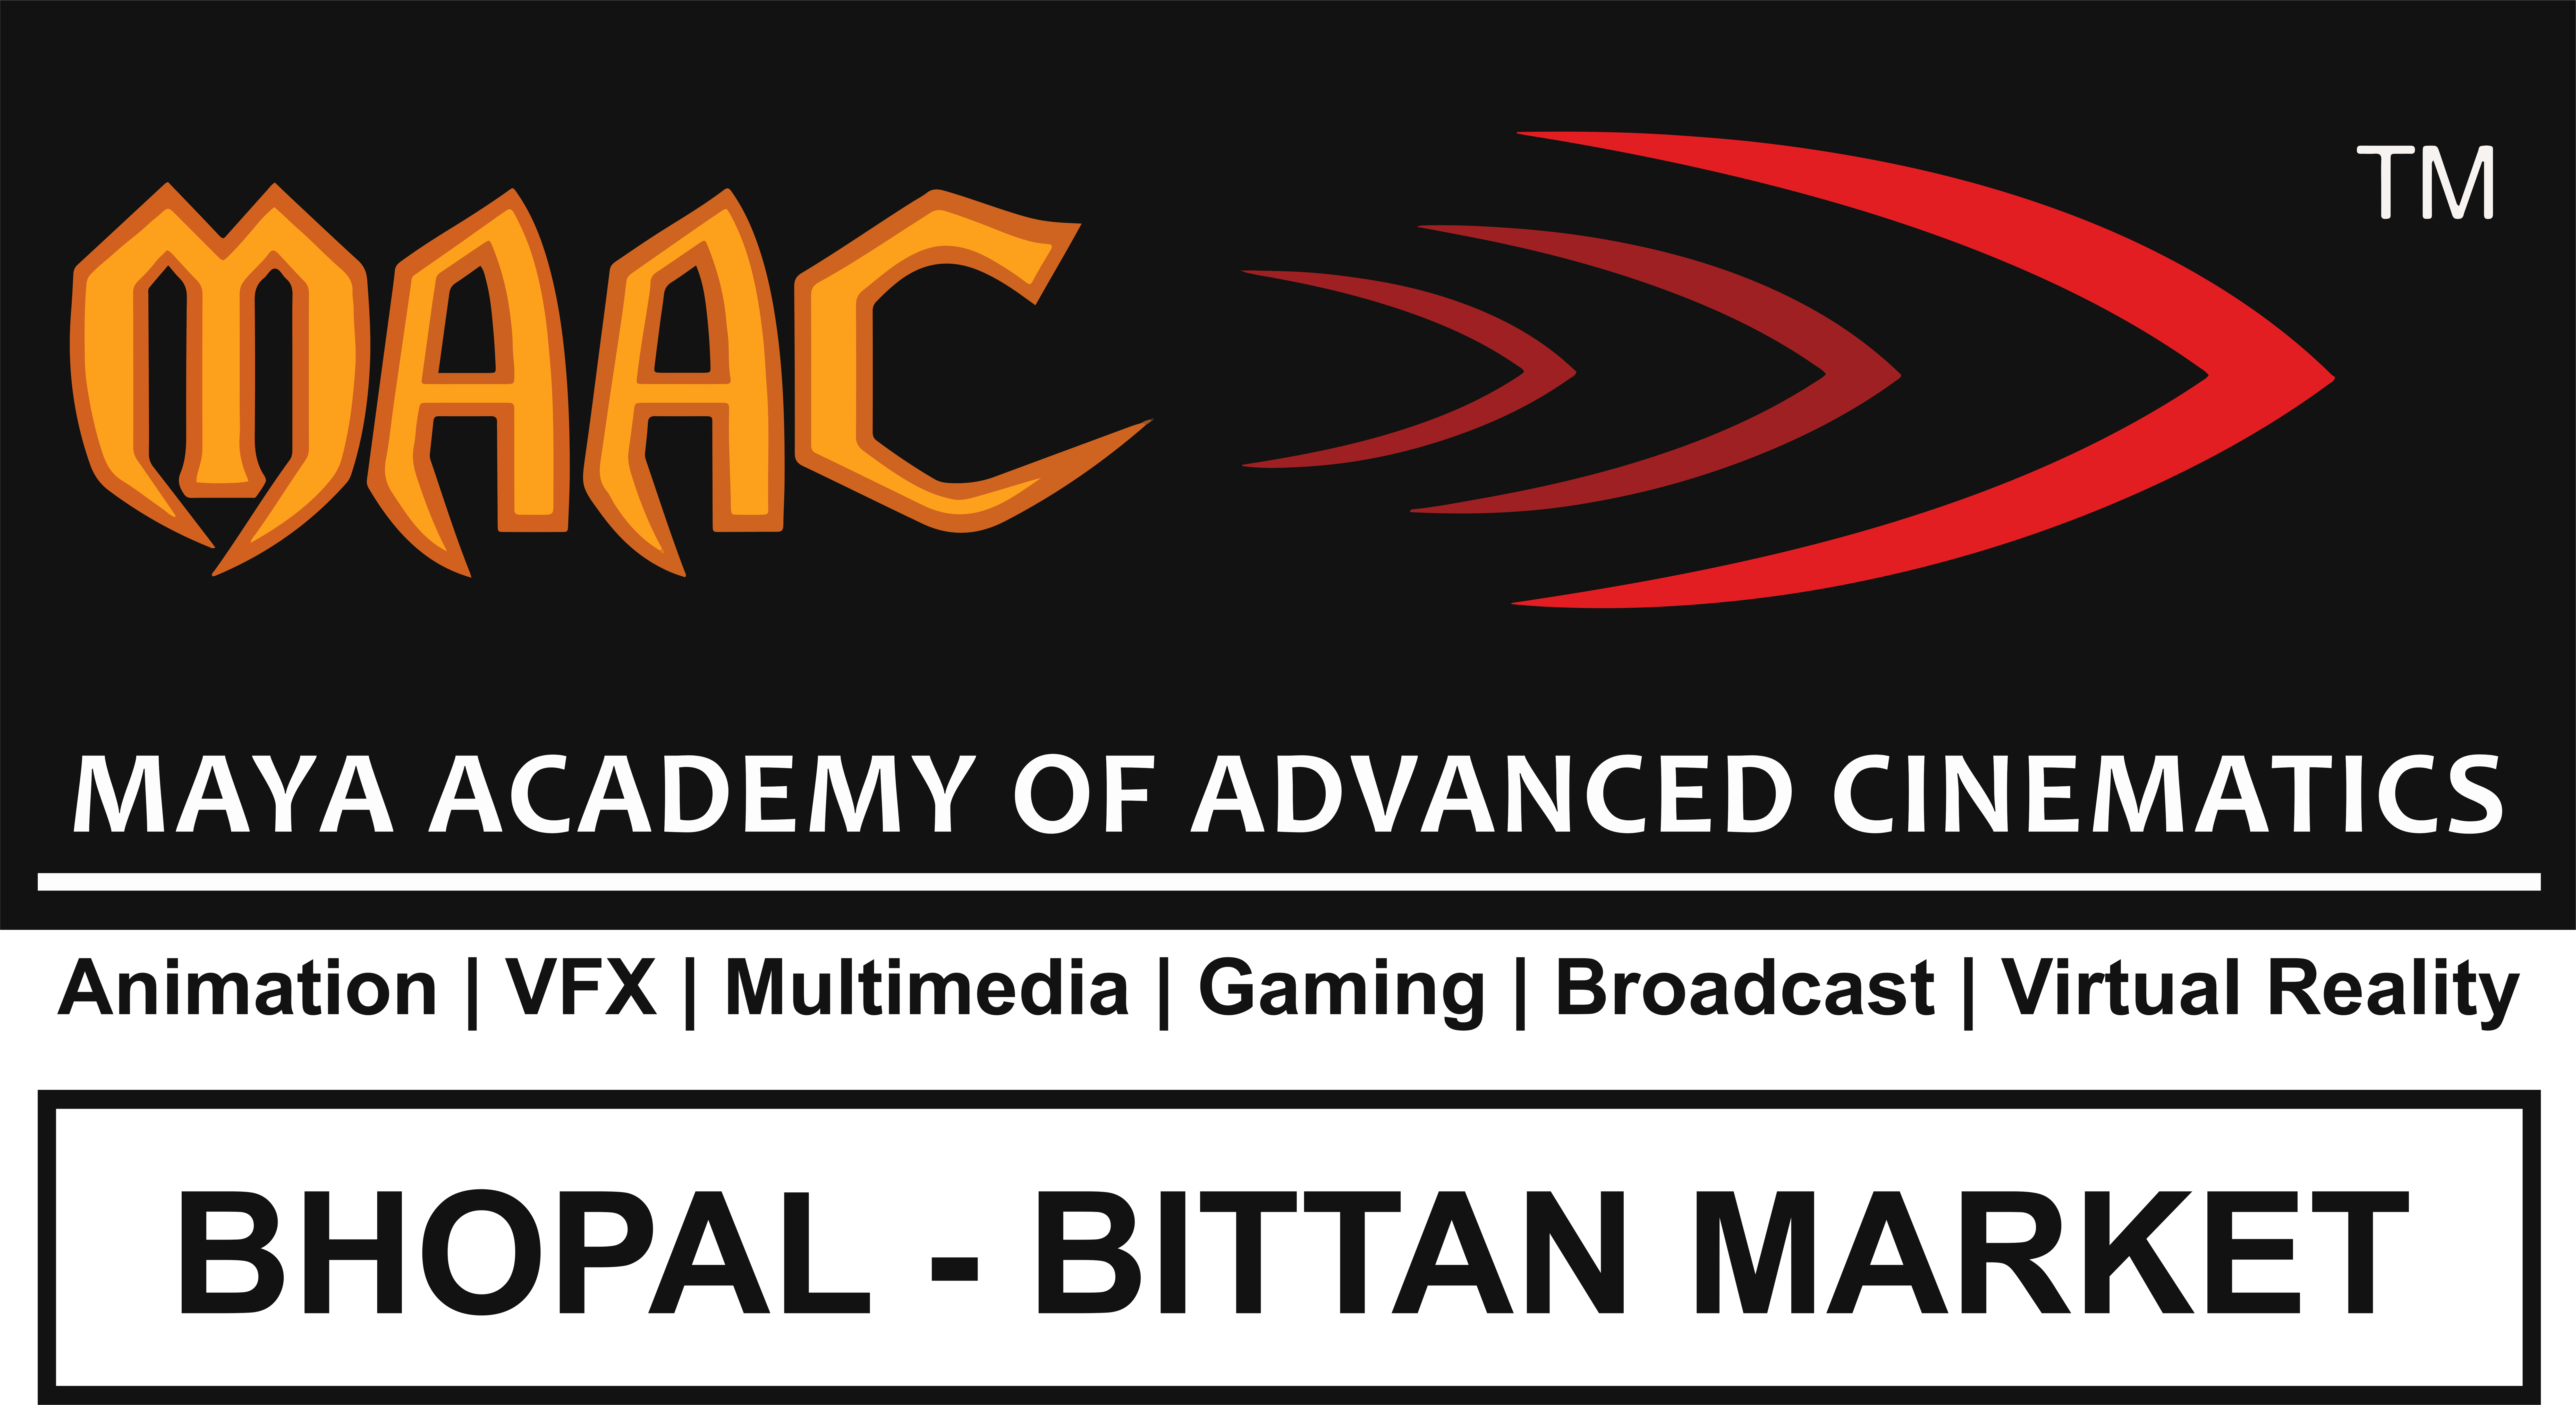 About MAAC